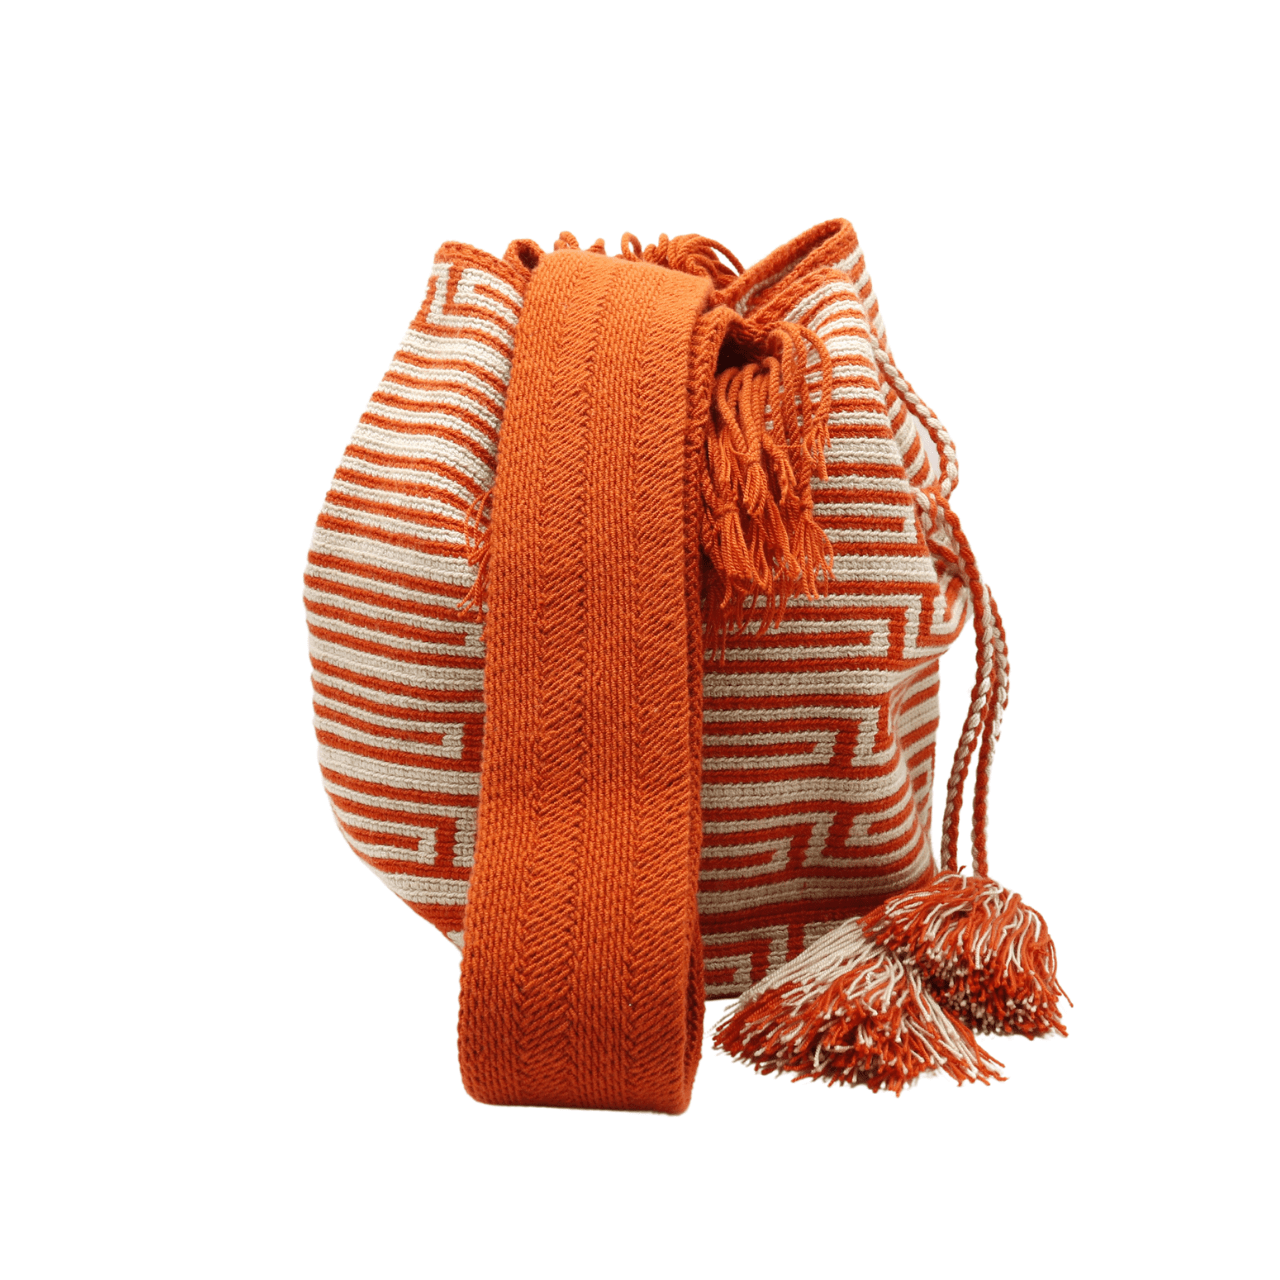 Salento Wayuu bag in vibrant tomato red and soothing beige, showcasing exquisite craftsmanship and vibrant colors